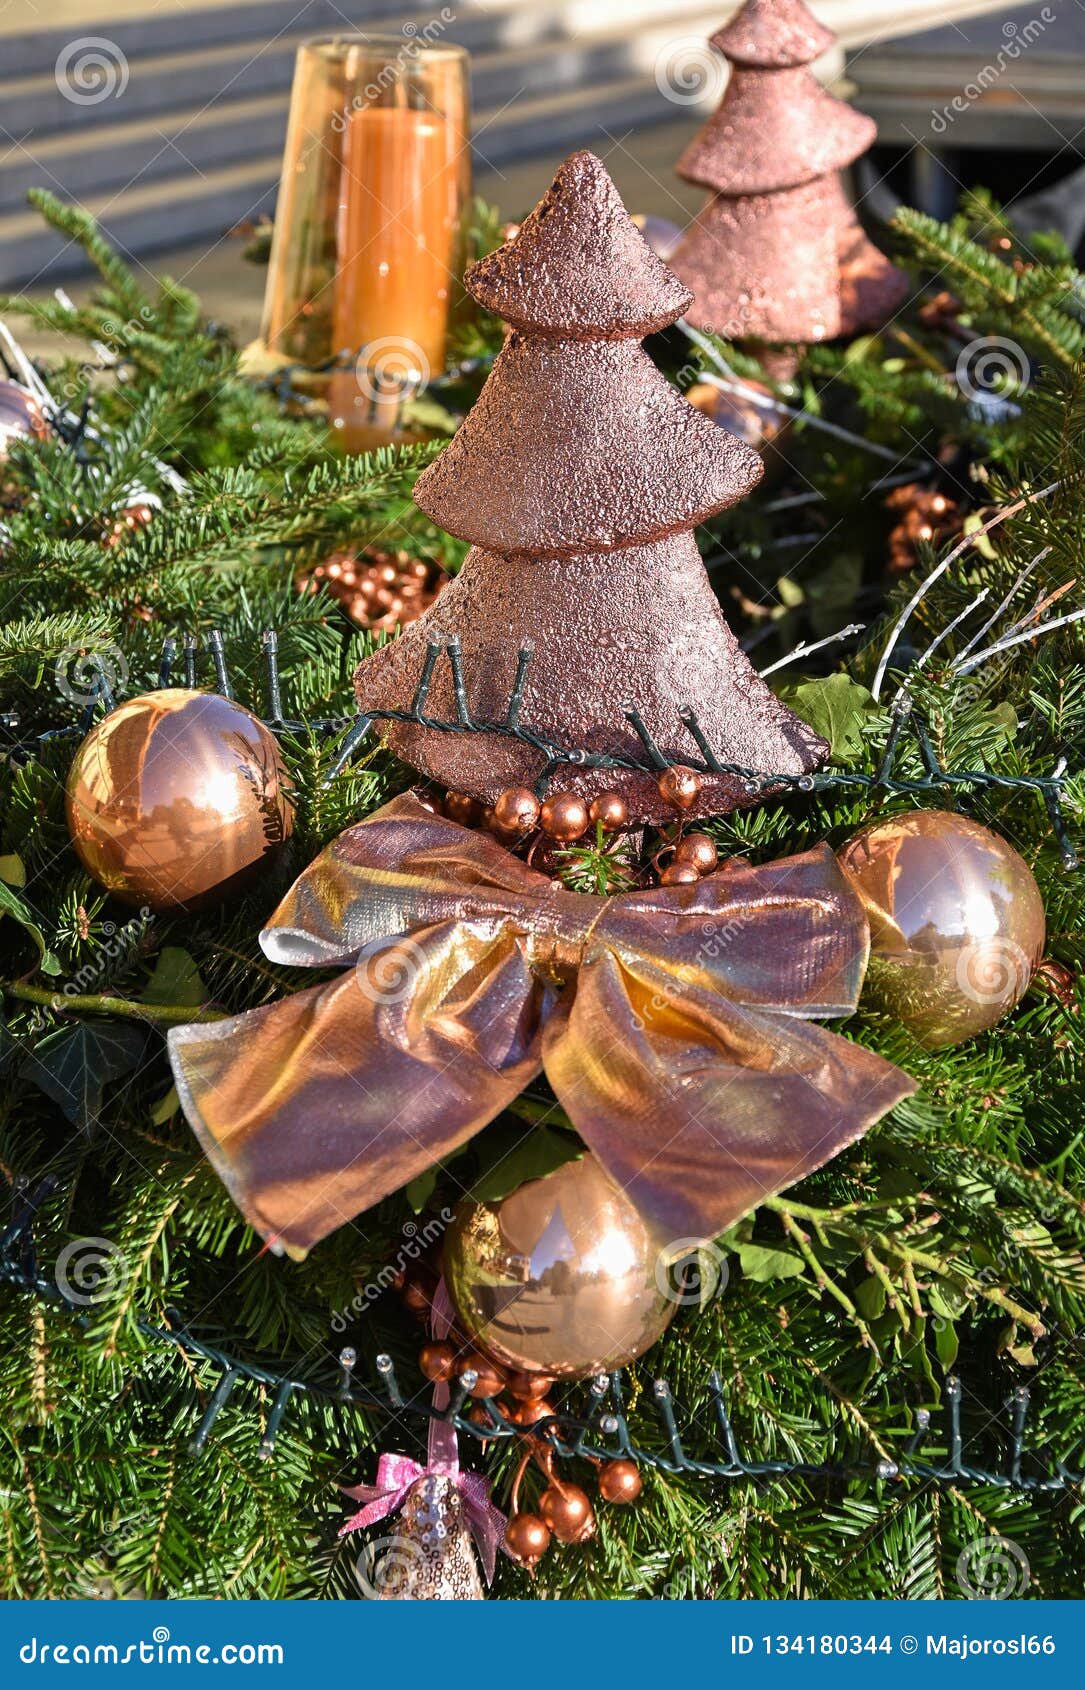 Christmas Ornament Outdoor before Holiday Stock Photo - Image of candle ...